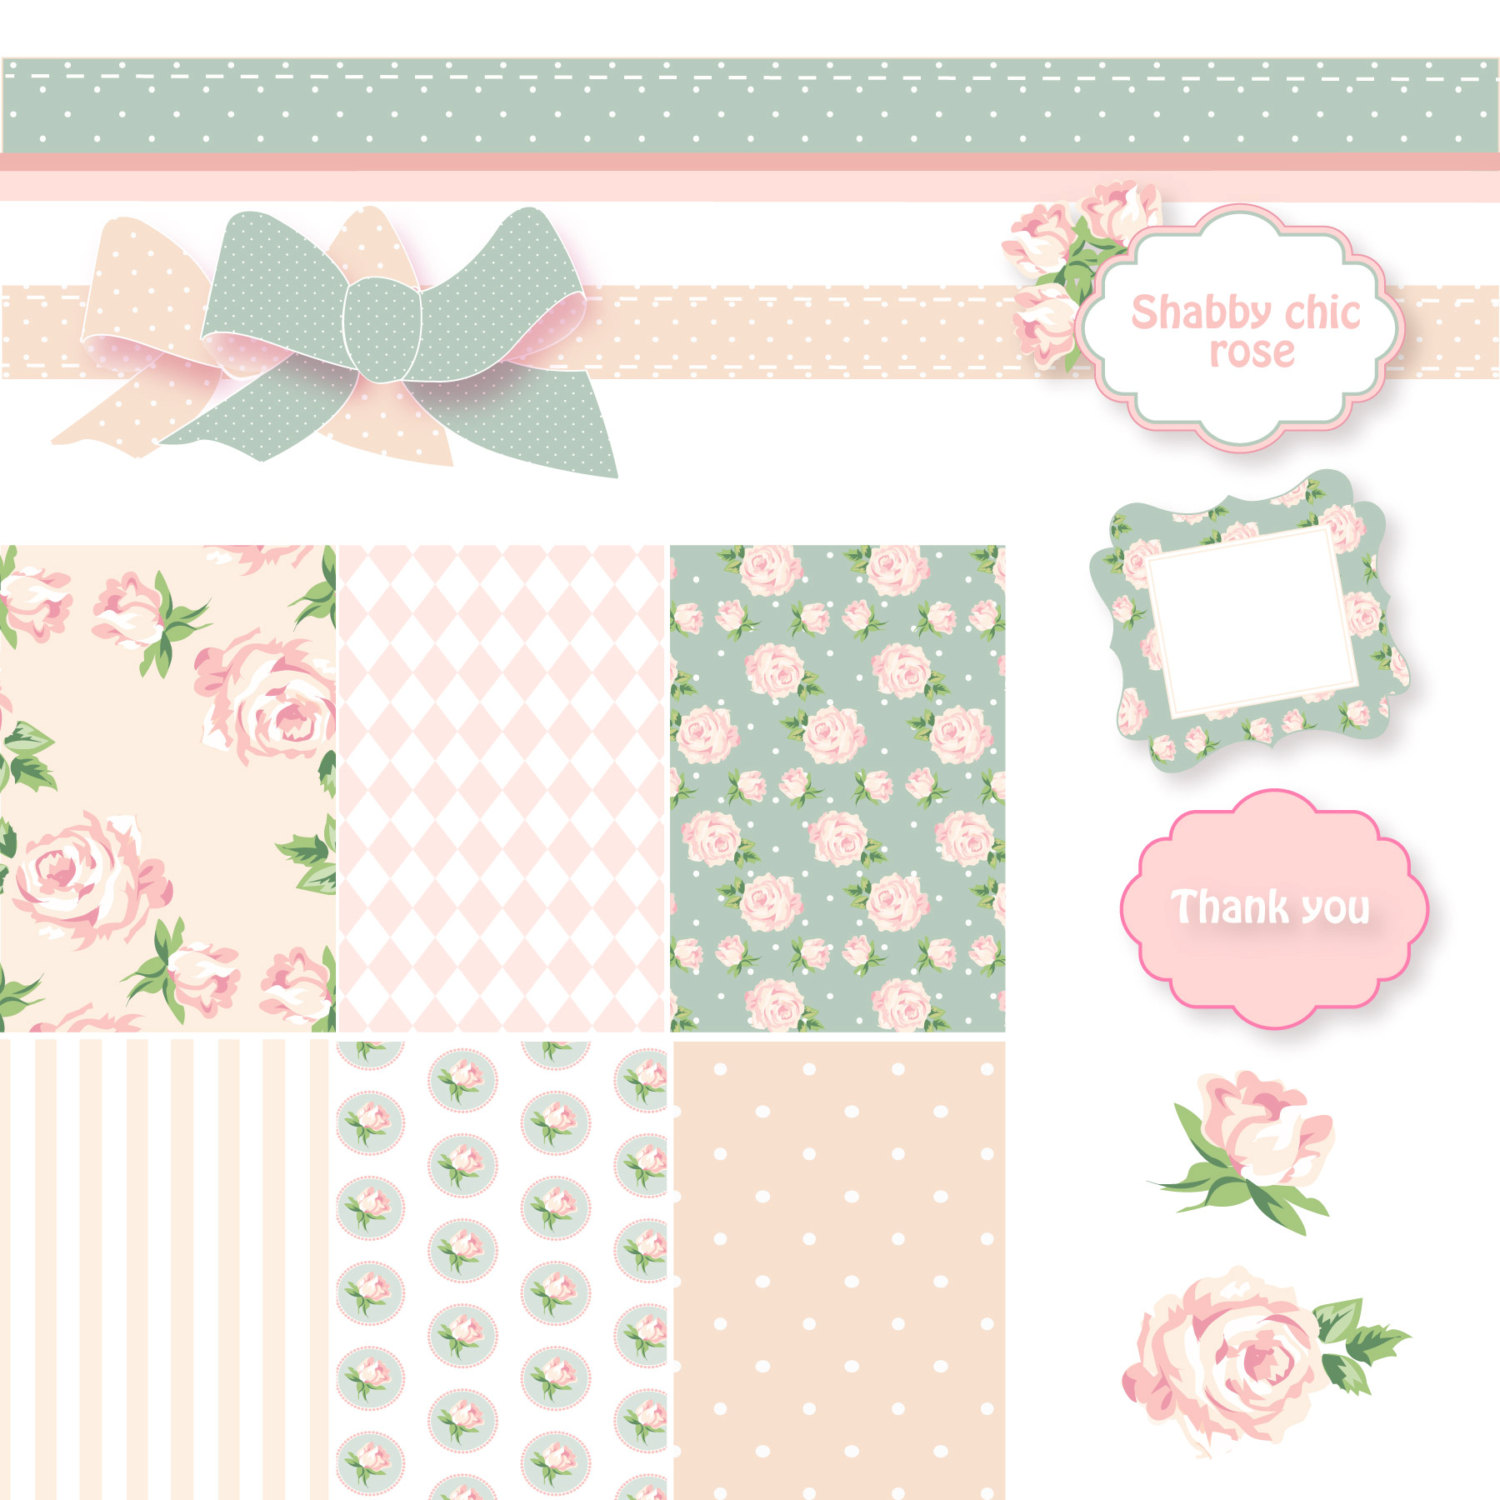 Shabby Chic Digital Scrapbook Paper Pack Pink And By Angelinaworks